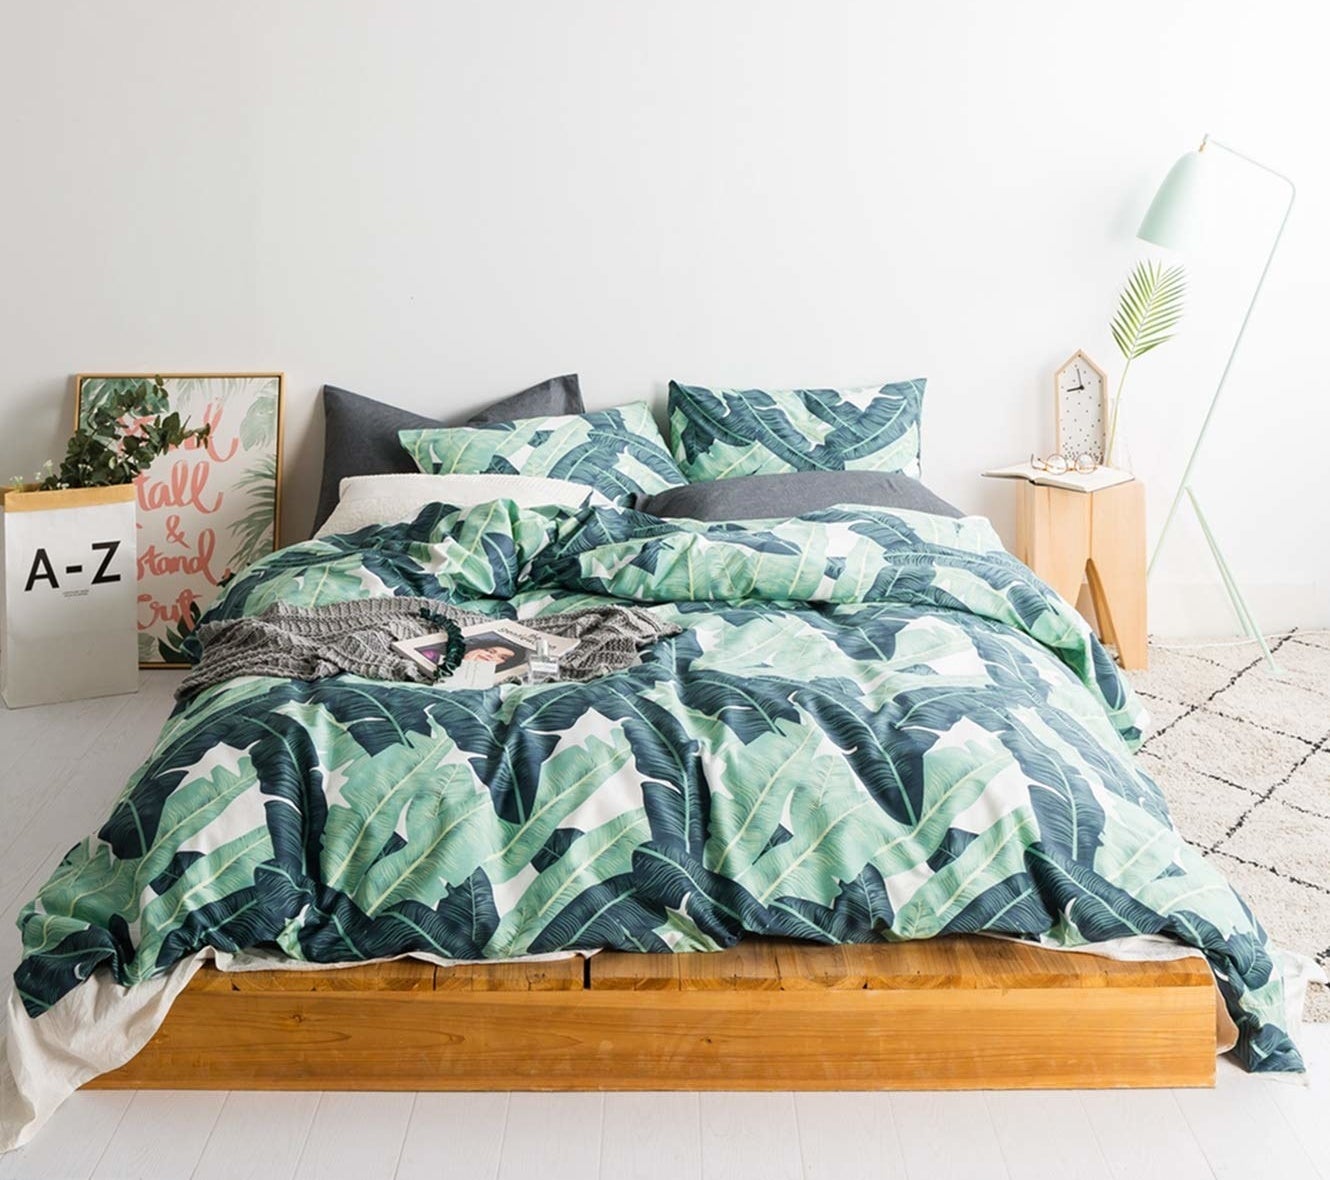 the tropical duvet set with a floral print in different shades of green